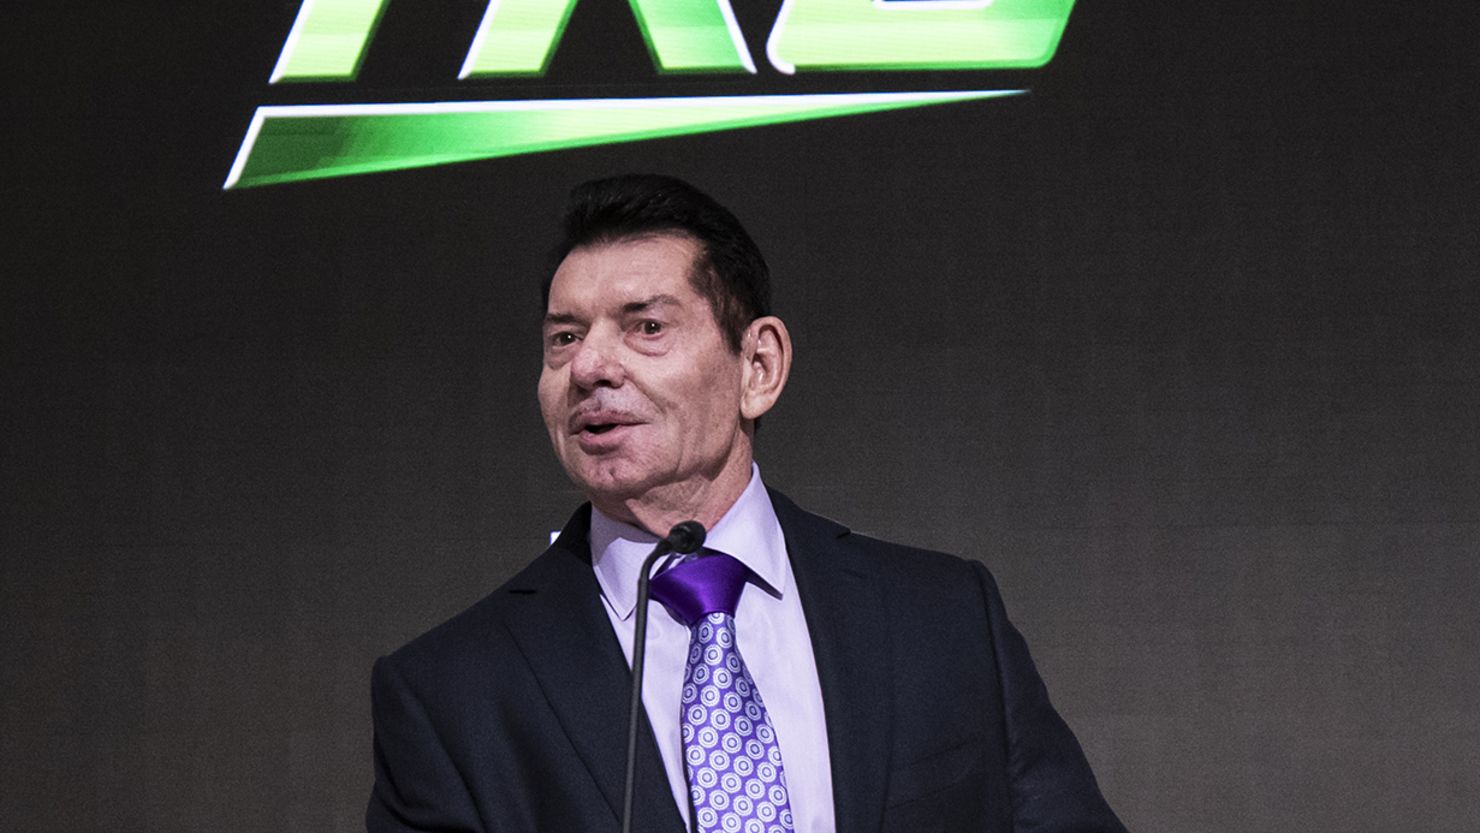 Vince McMahon resigned as executive chairman of wrestling's parent company TKO after being sued by a former employee who says he sexually abused and trafficked her.